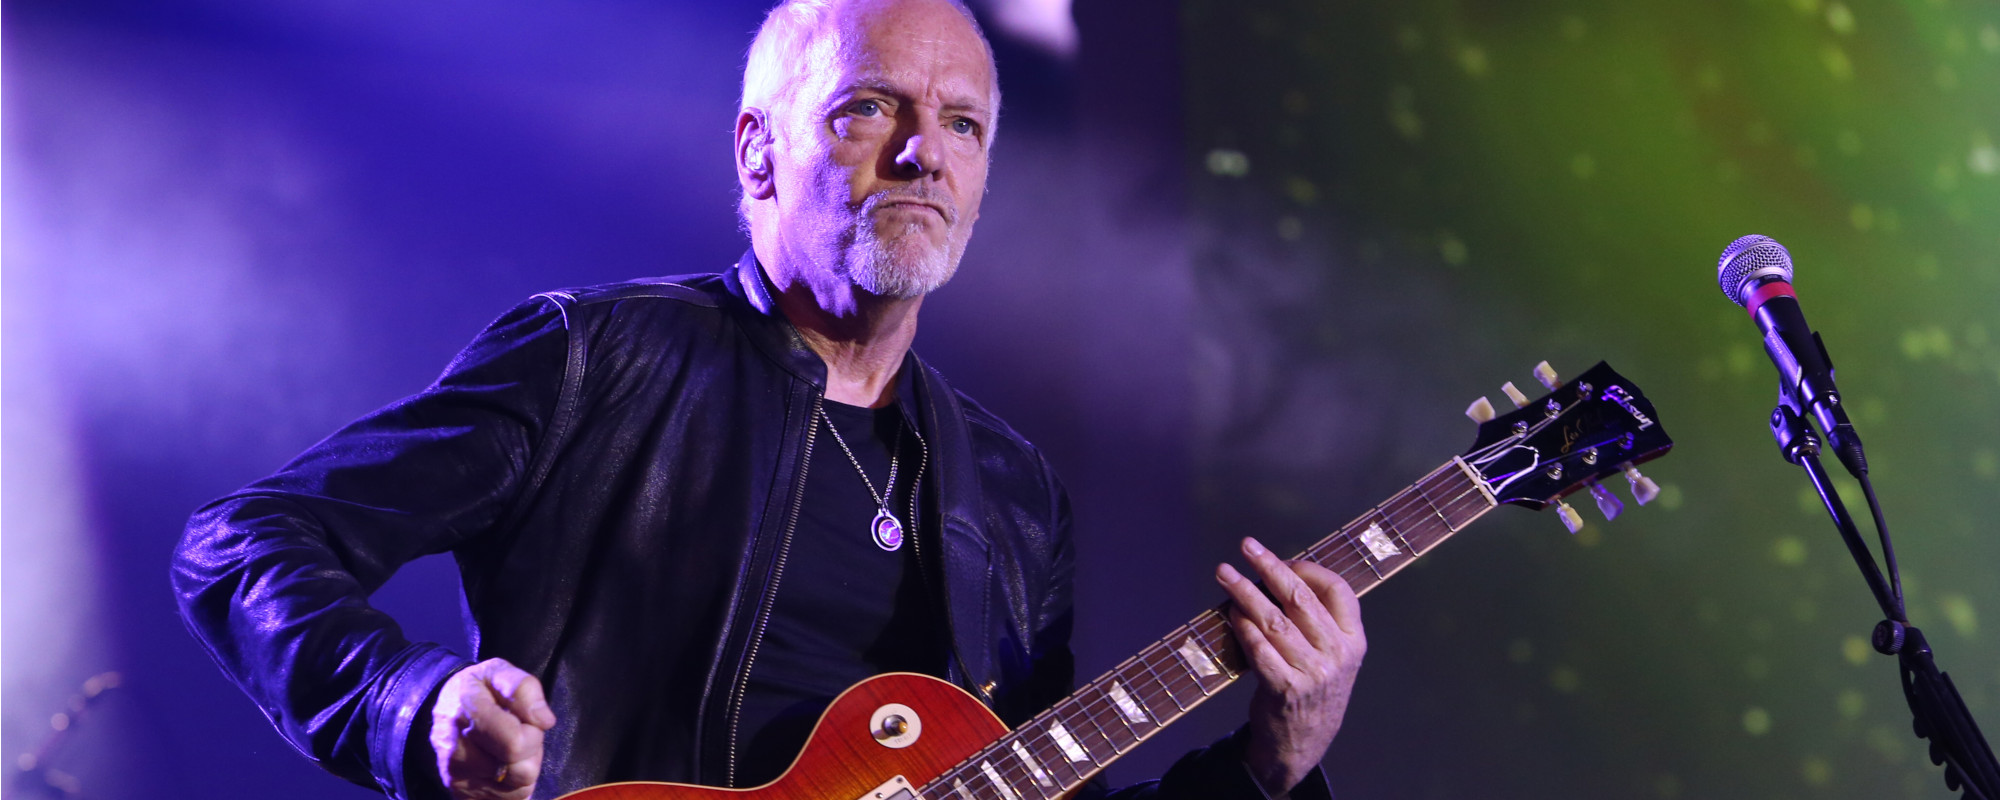 Peter Frampton Openly Details Feeling Threatened by Early Success: “Scared the S–t Out of Me”